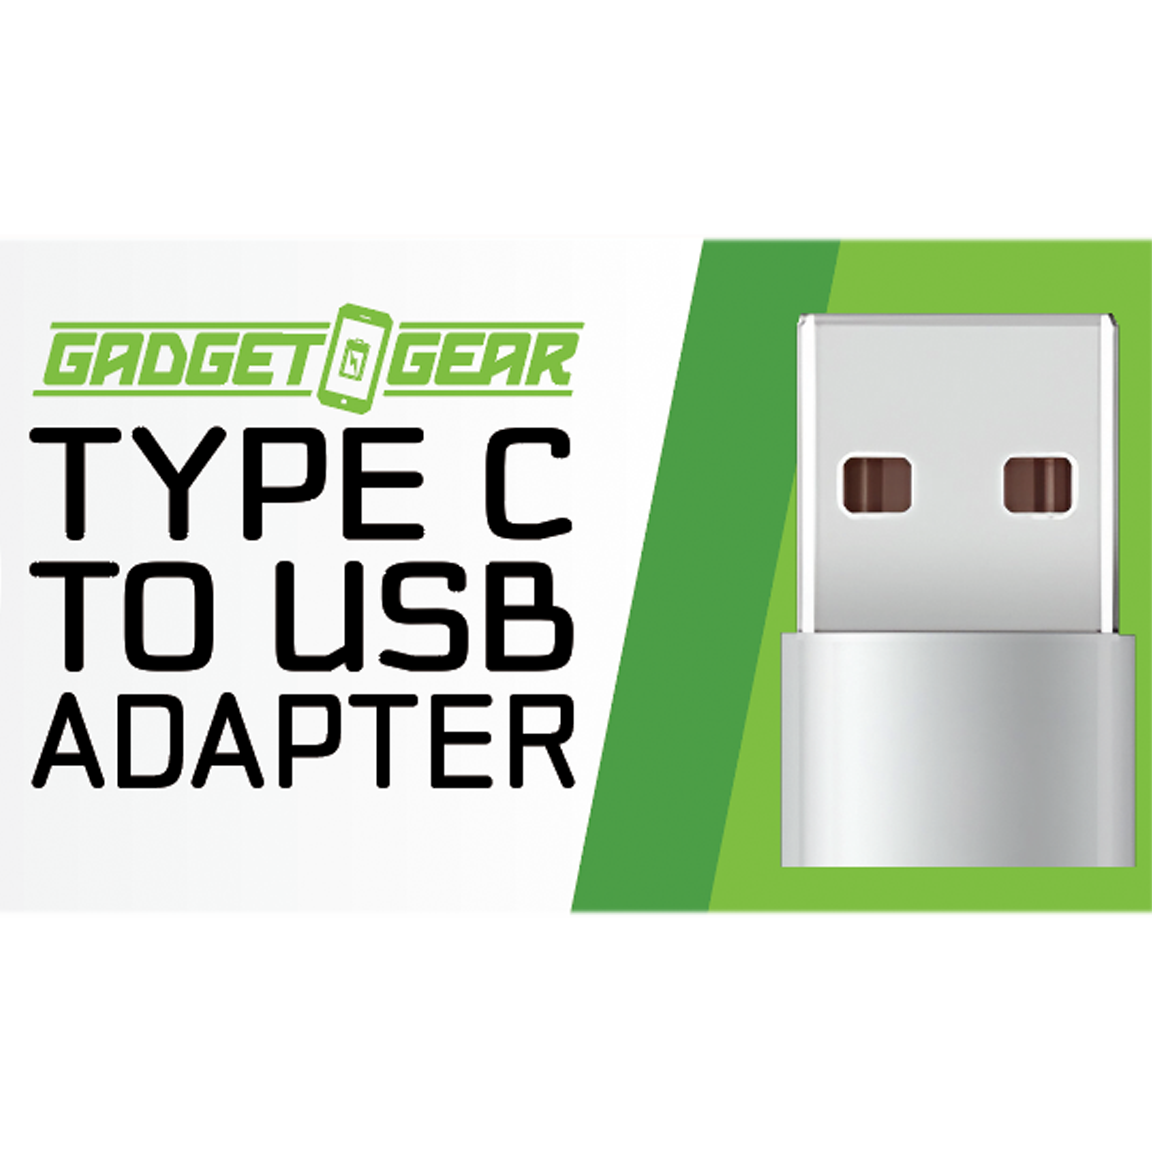 WHOLESALE USB-C-TO-USB-A ADAPTER CONVERTER 6 PIECES PER DISPLAY 24836